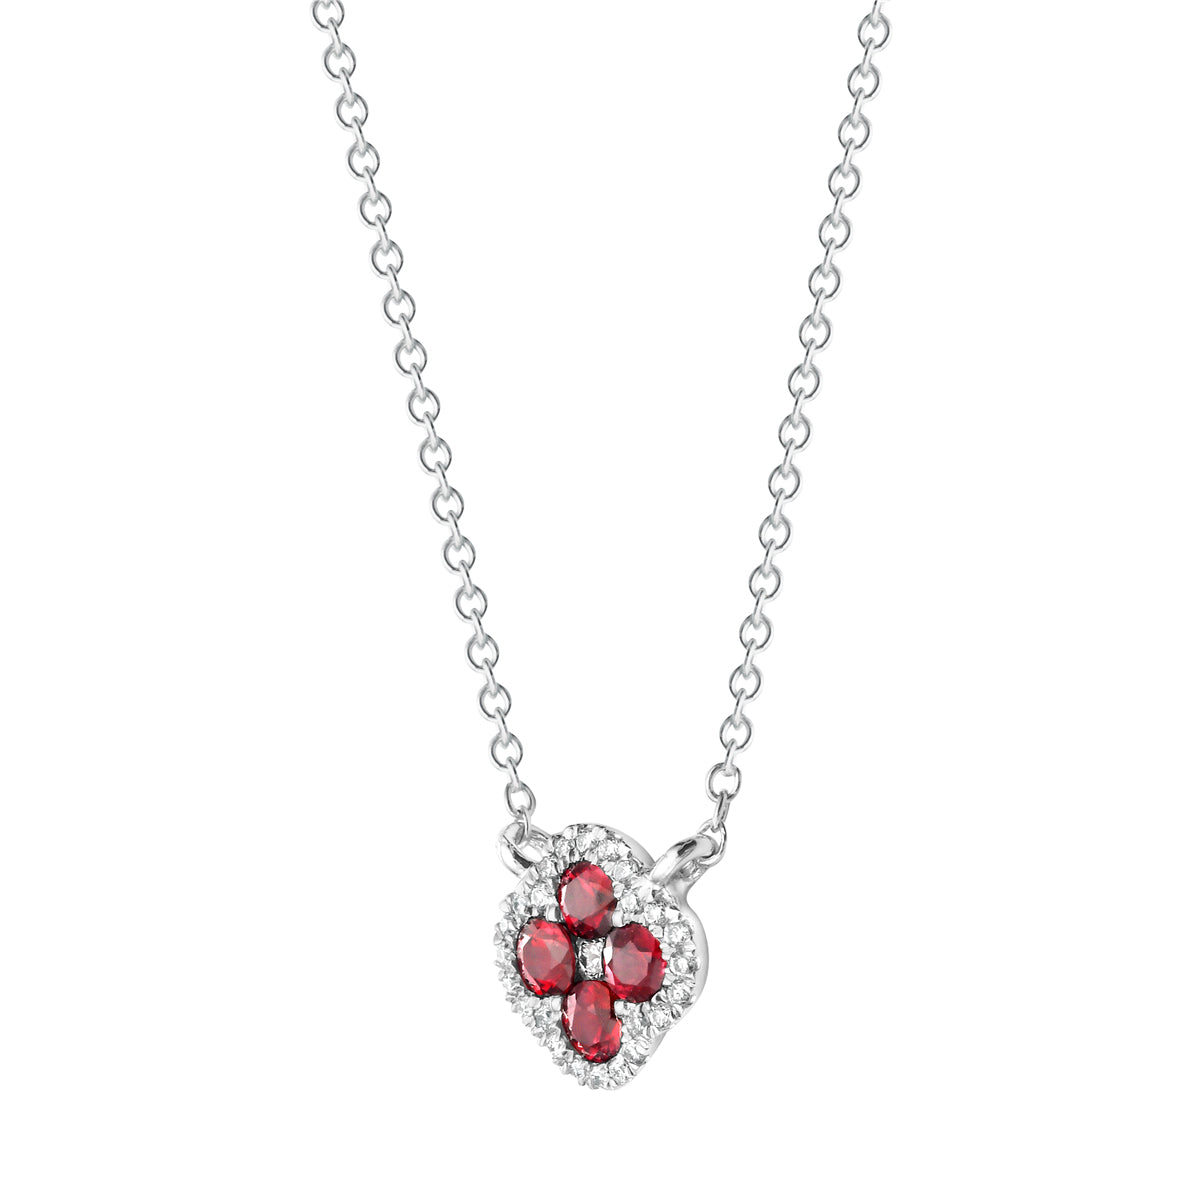 Necklace 14KW/0.4G 4RUBY-0.21CT 25RD-0.05CT